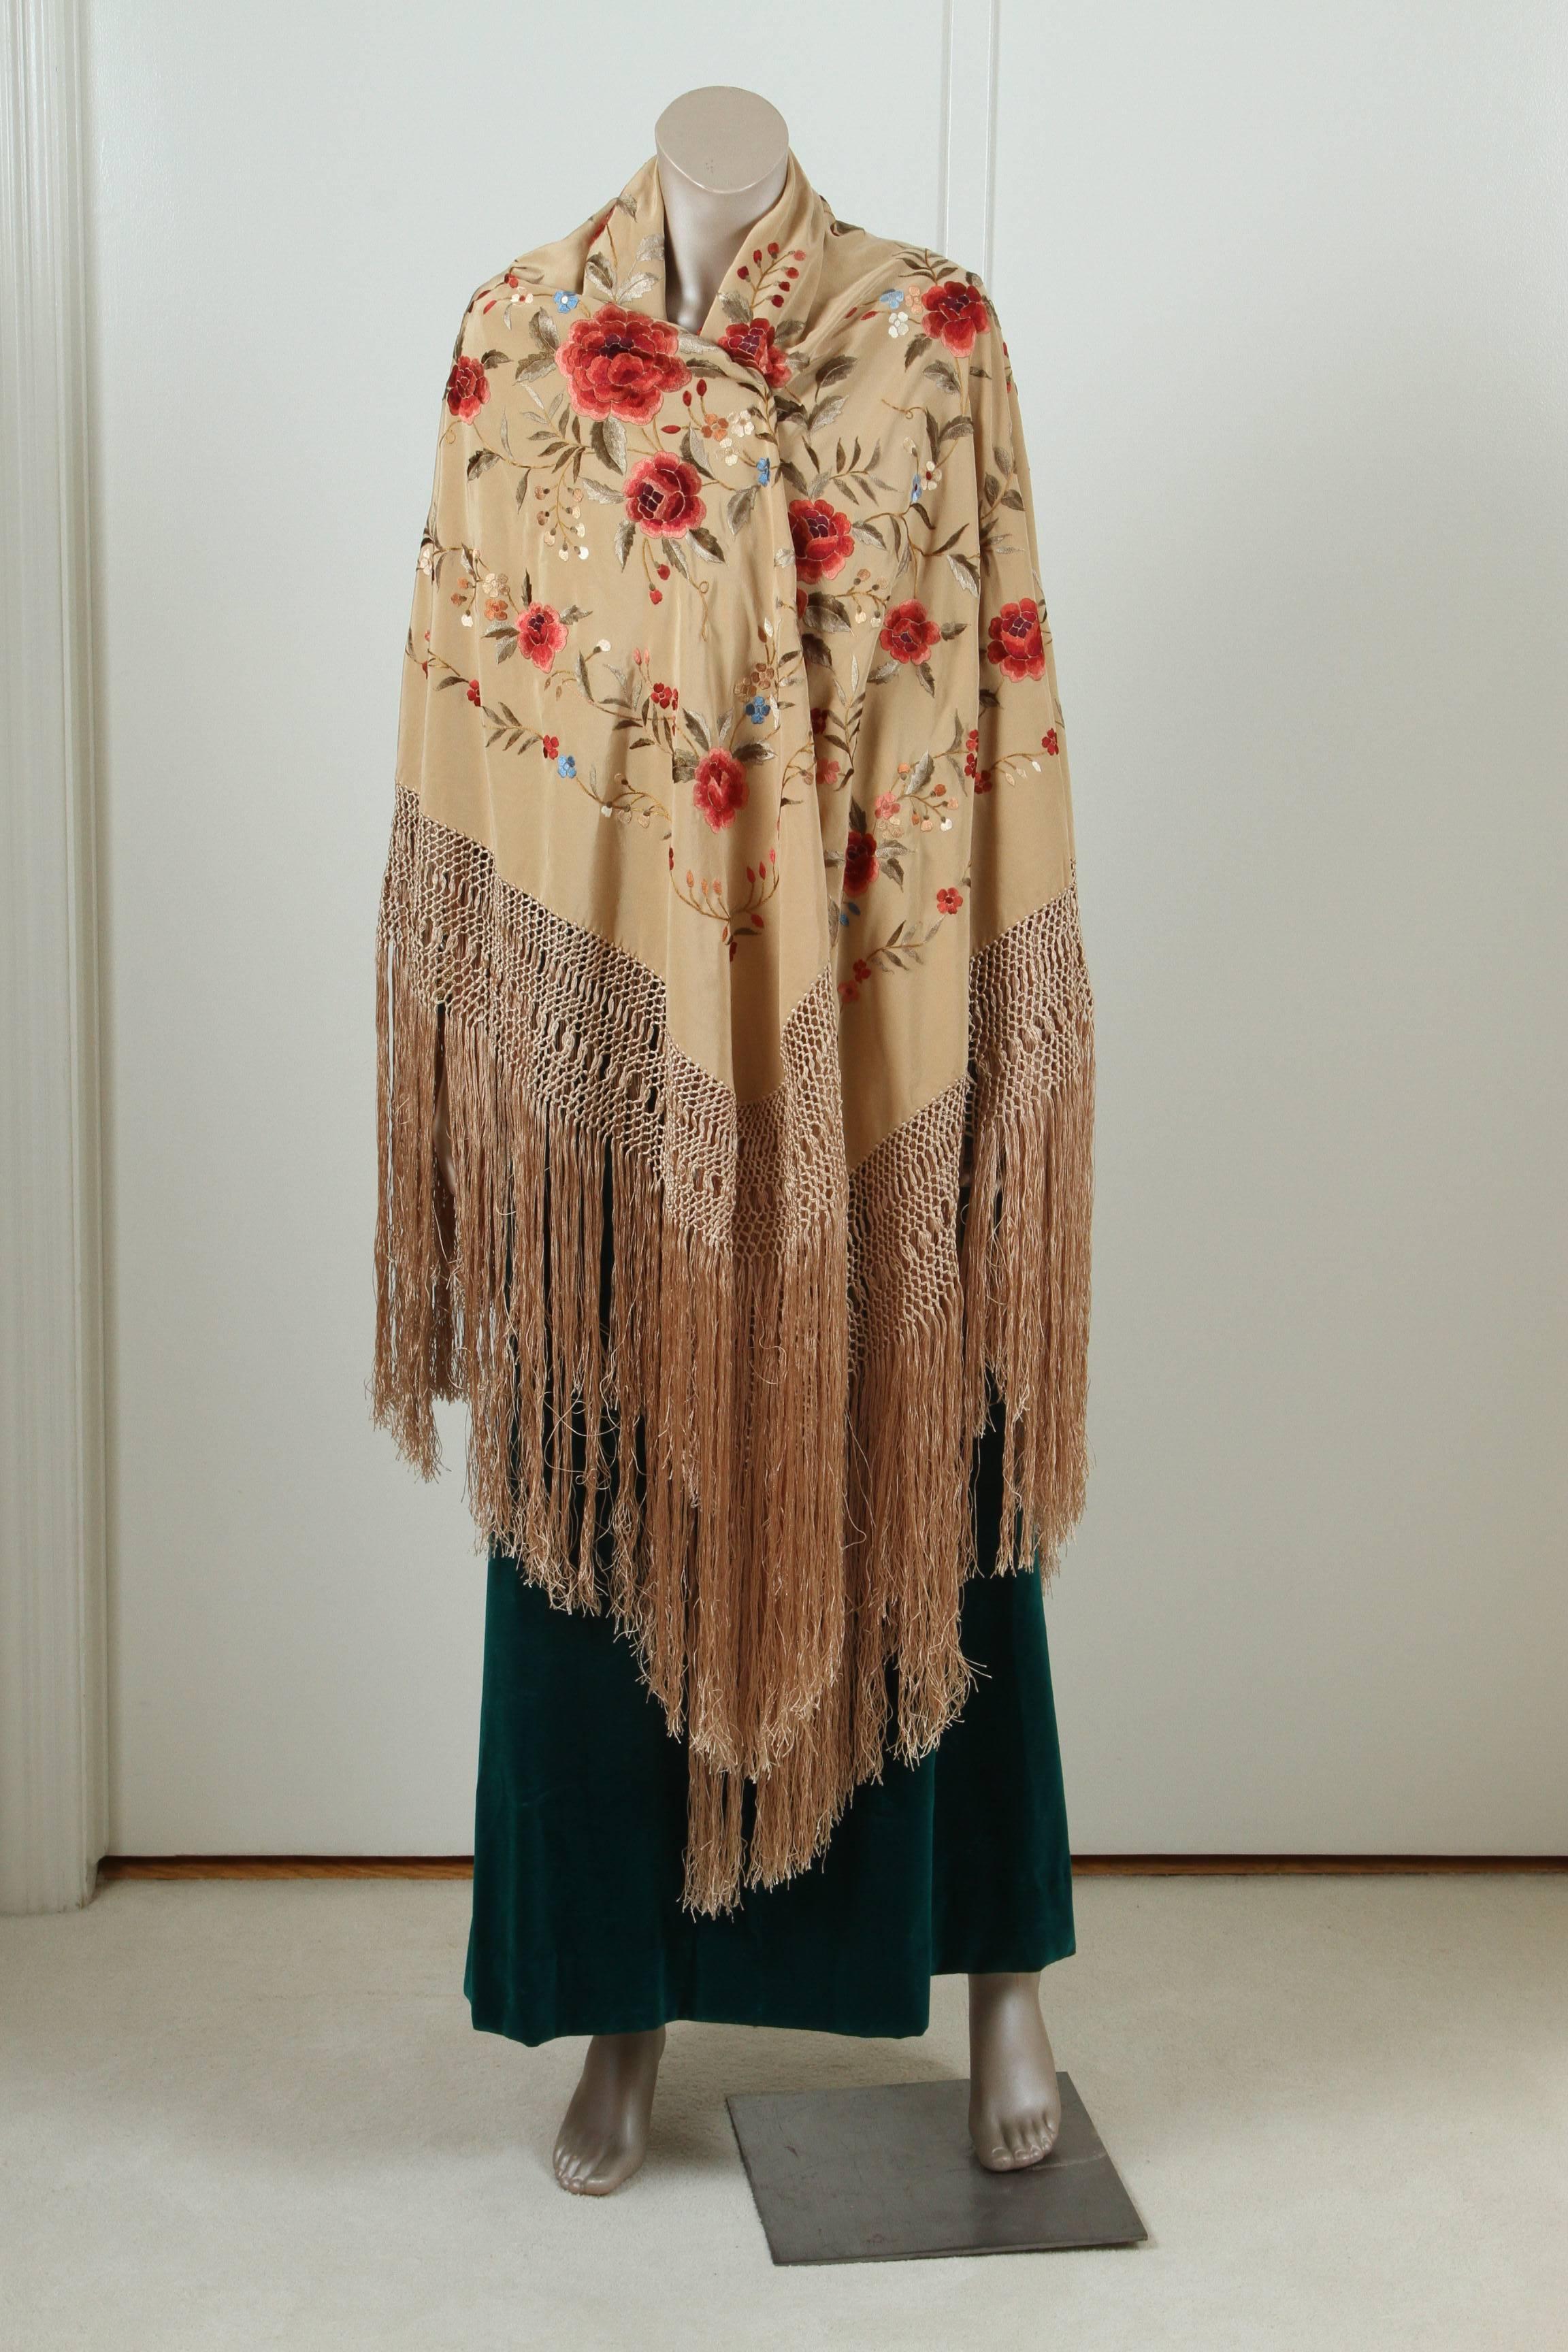 A gorgeous Spanish floral hand embroidered silk shawl with a long knotted fringe on all four sides.
This extraordinary wedding Flamenco silk shawl is completely hand embroidered, covered with amazing polychrome florals and foliage. Wonderful quality